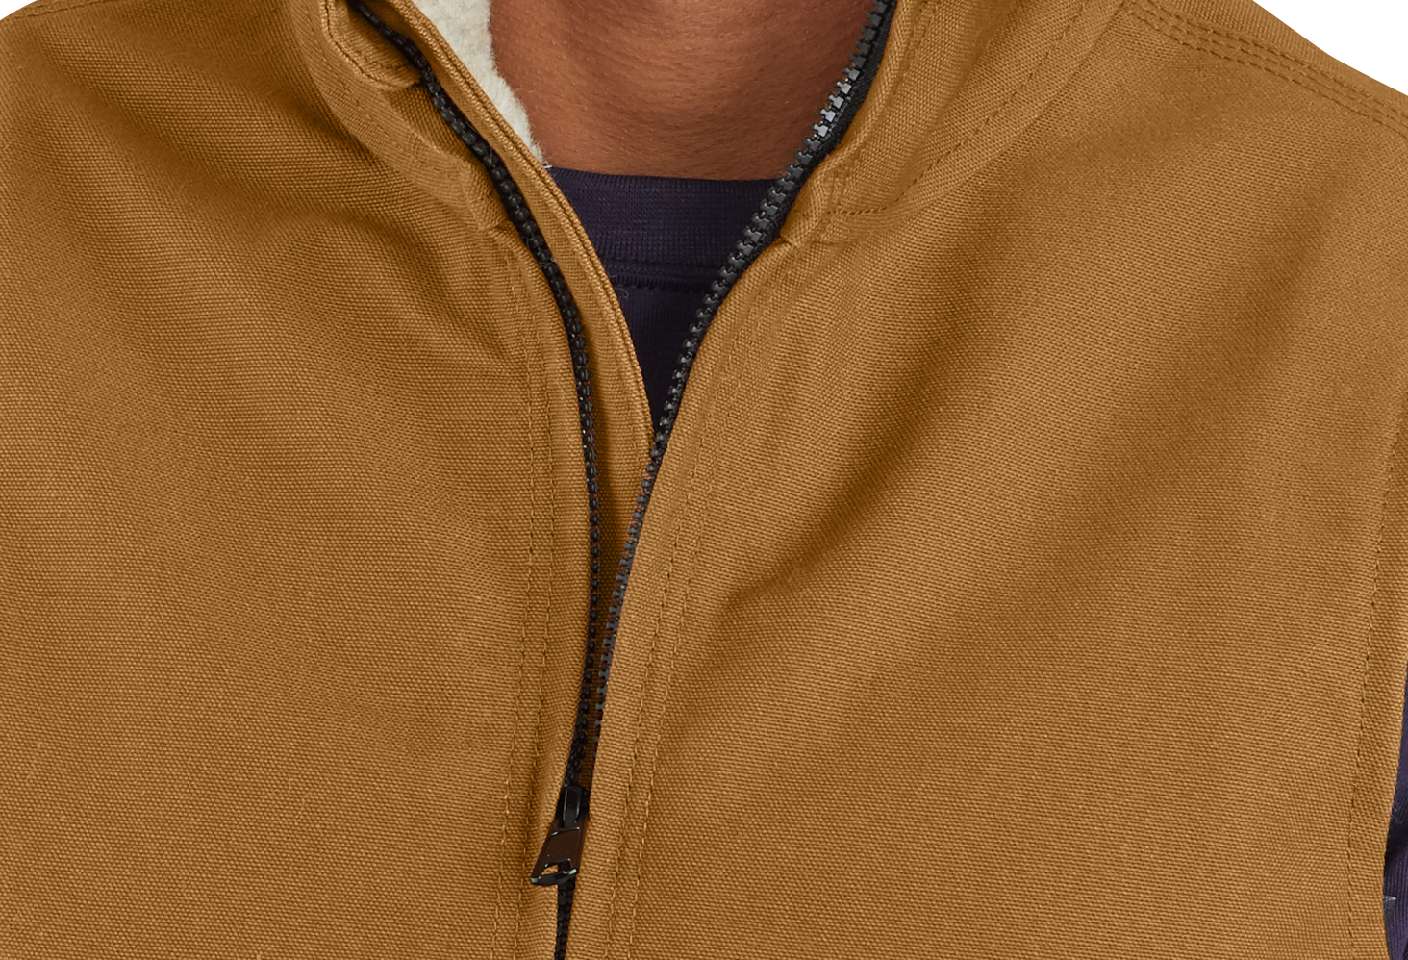 Behind the zipper, an inner storm flap keeps out the cold and wet